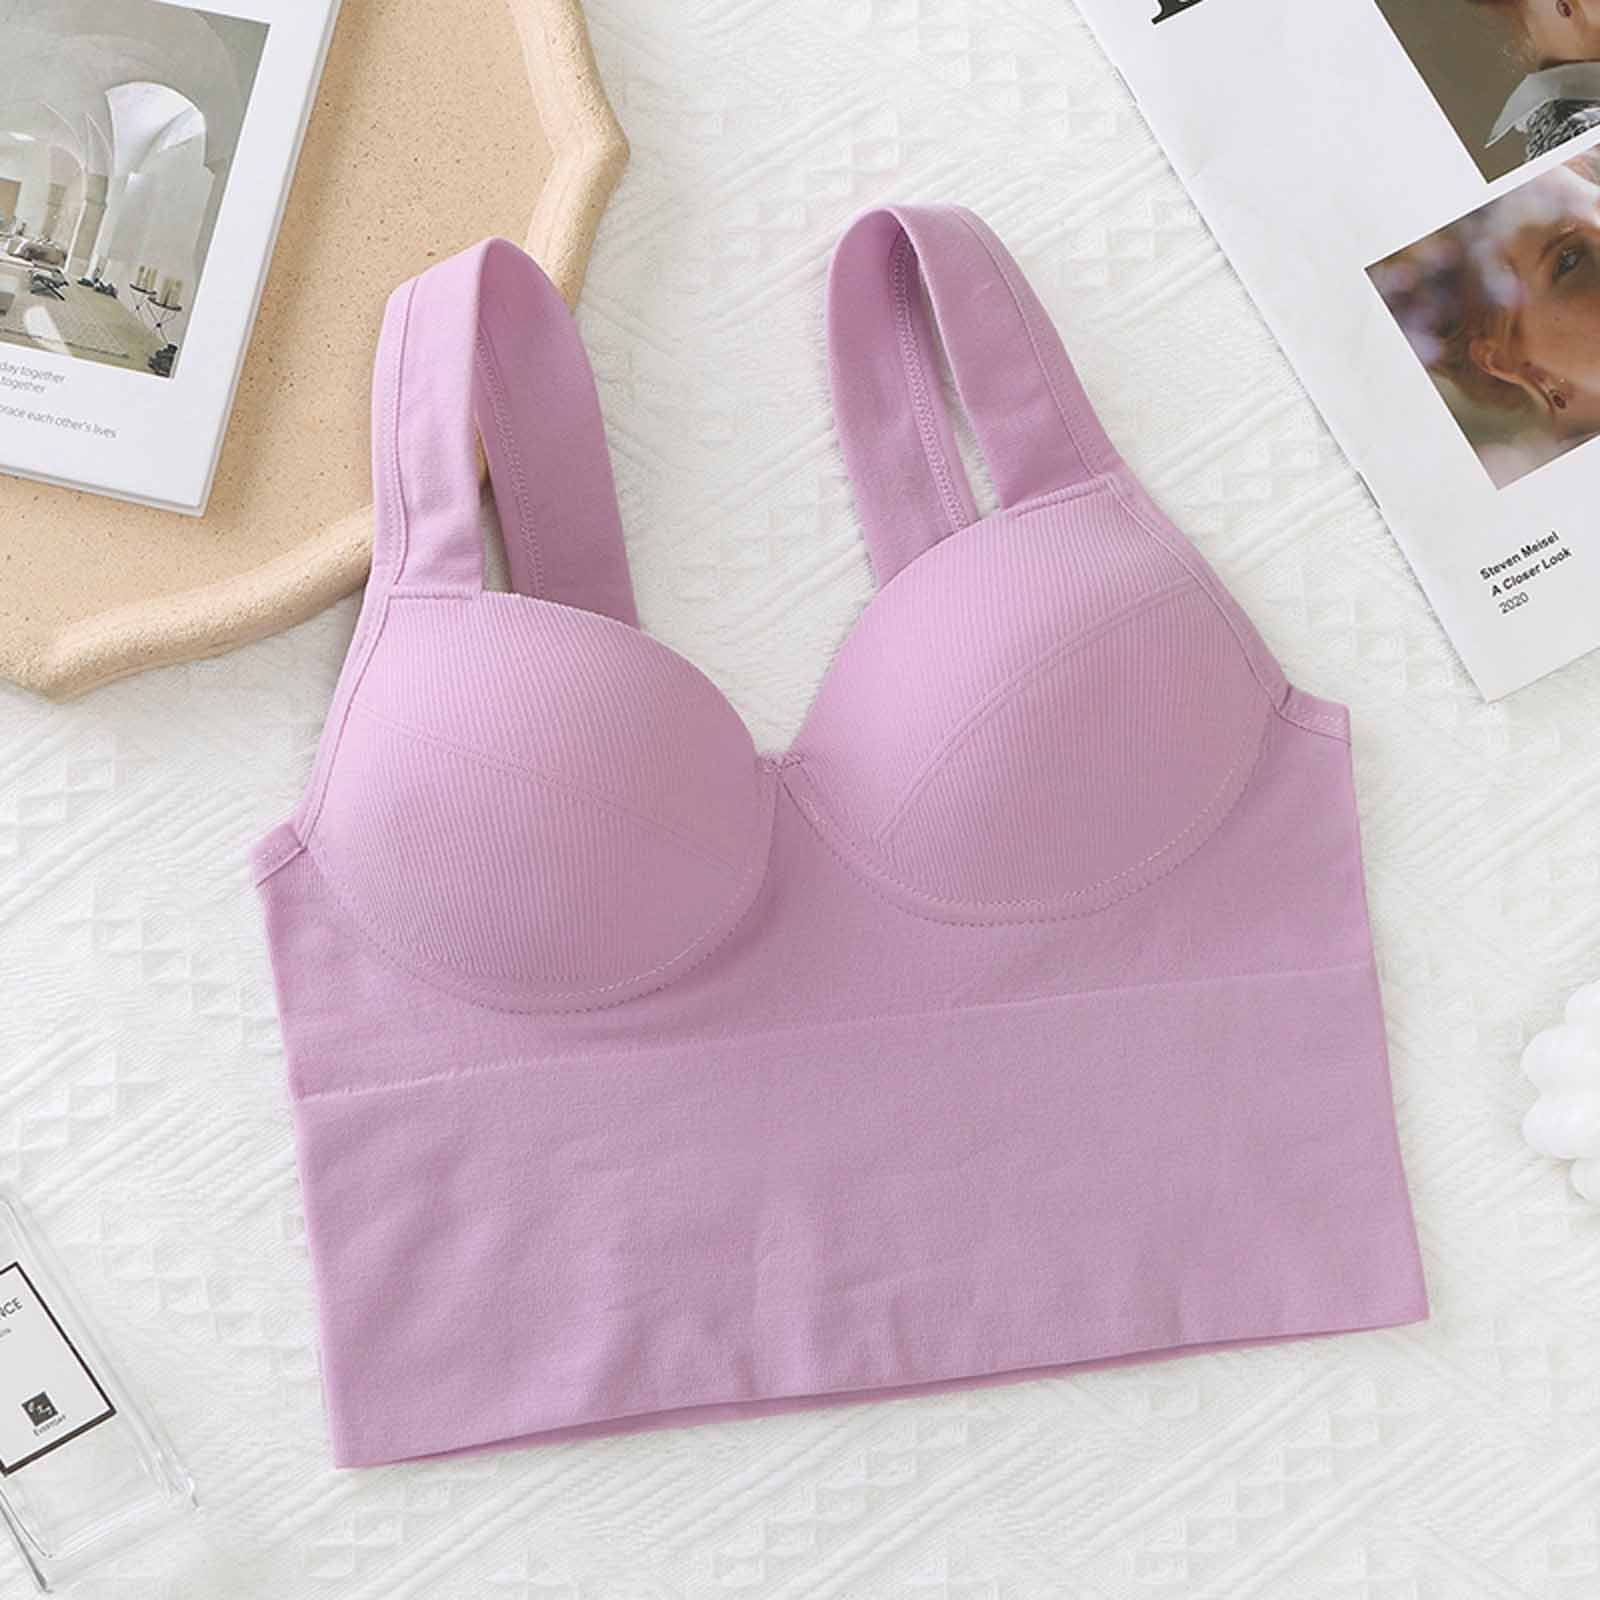 amlbb Women's Push-Up Bra Underwear Thin Back Strap With A Bra Pad Inside  To Prevent The Bare Chest Integrated Vest Bra for Everyday Comfort 